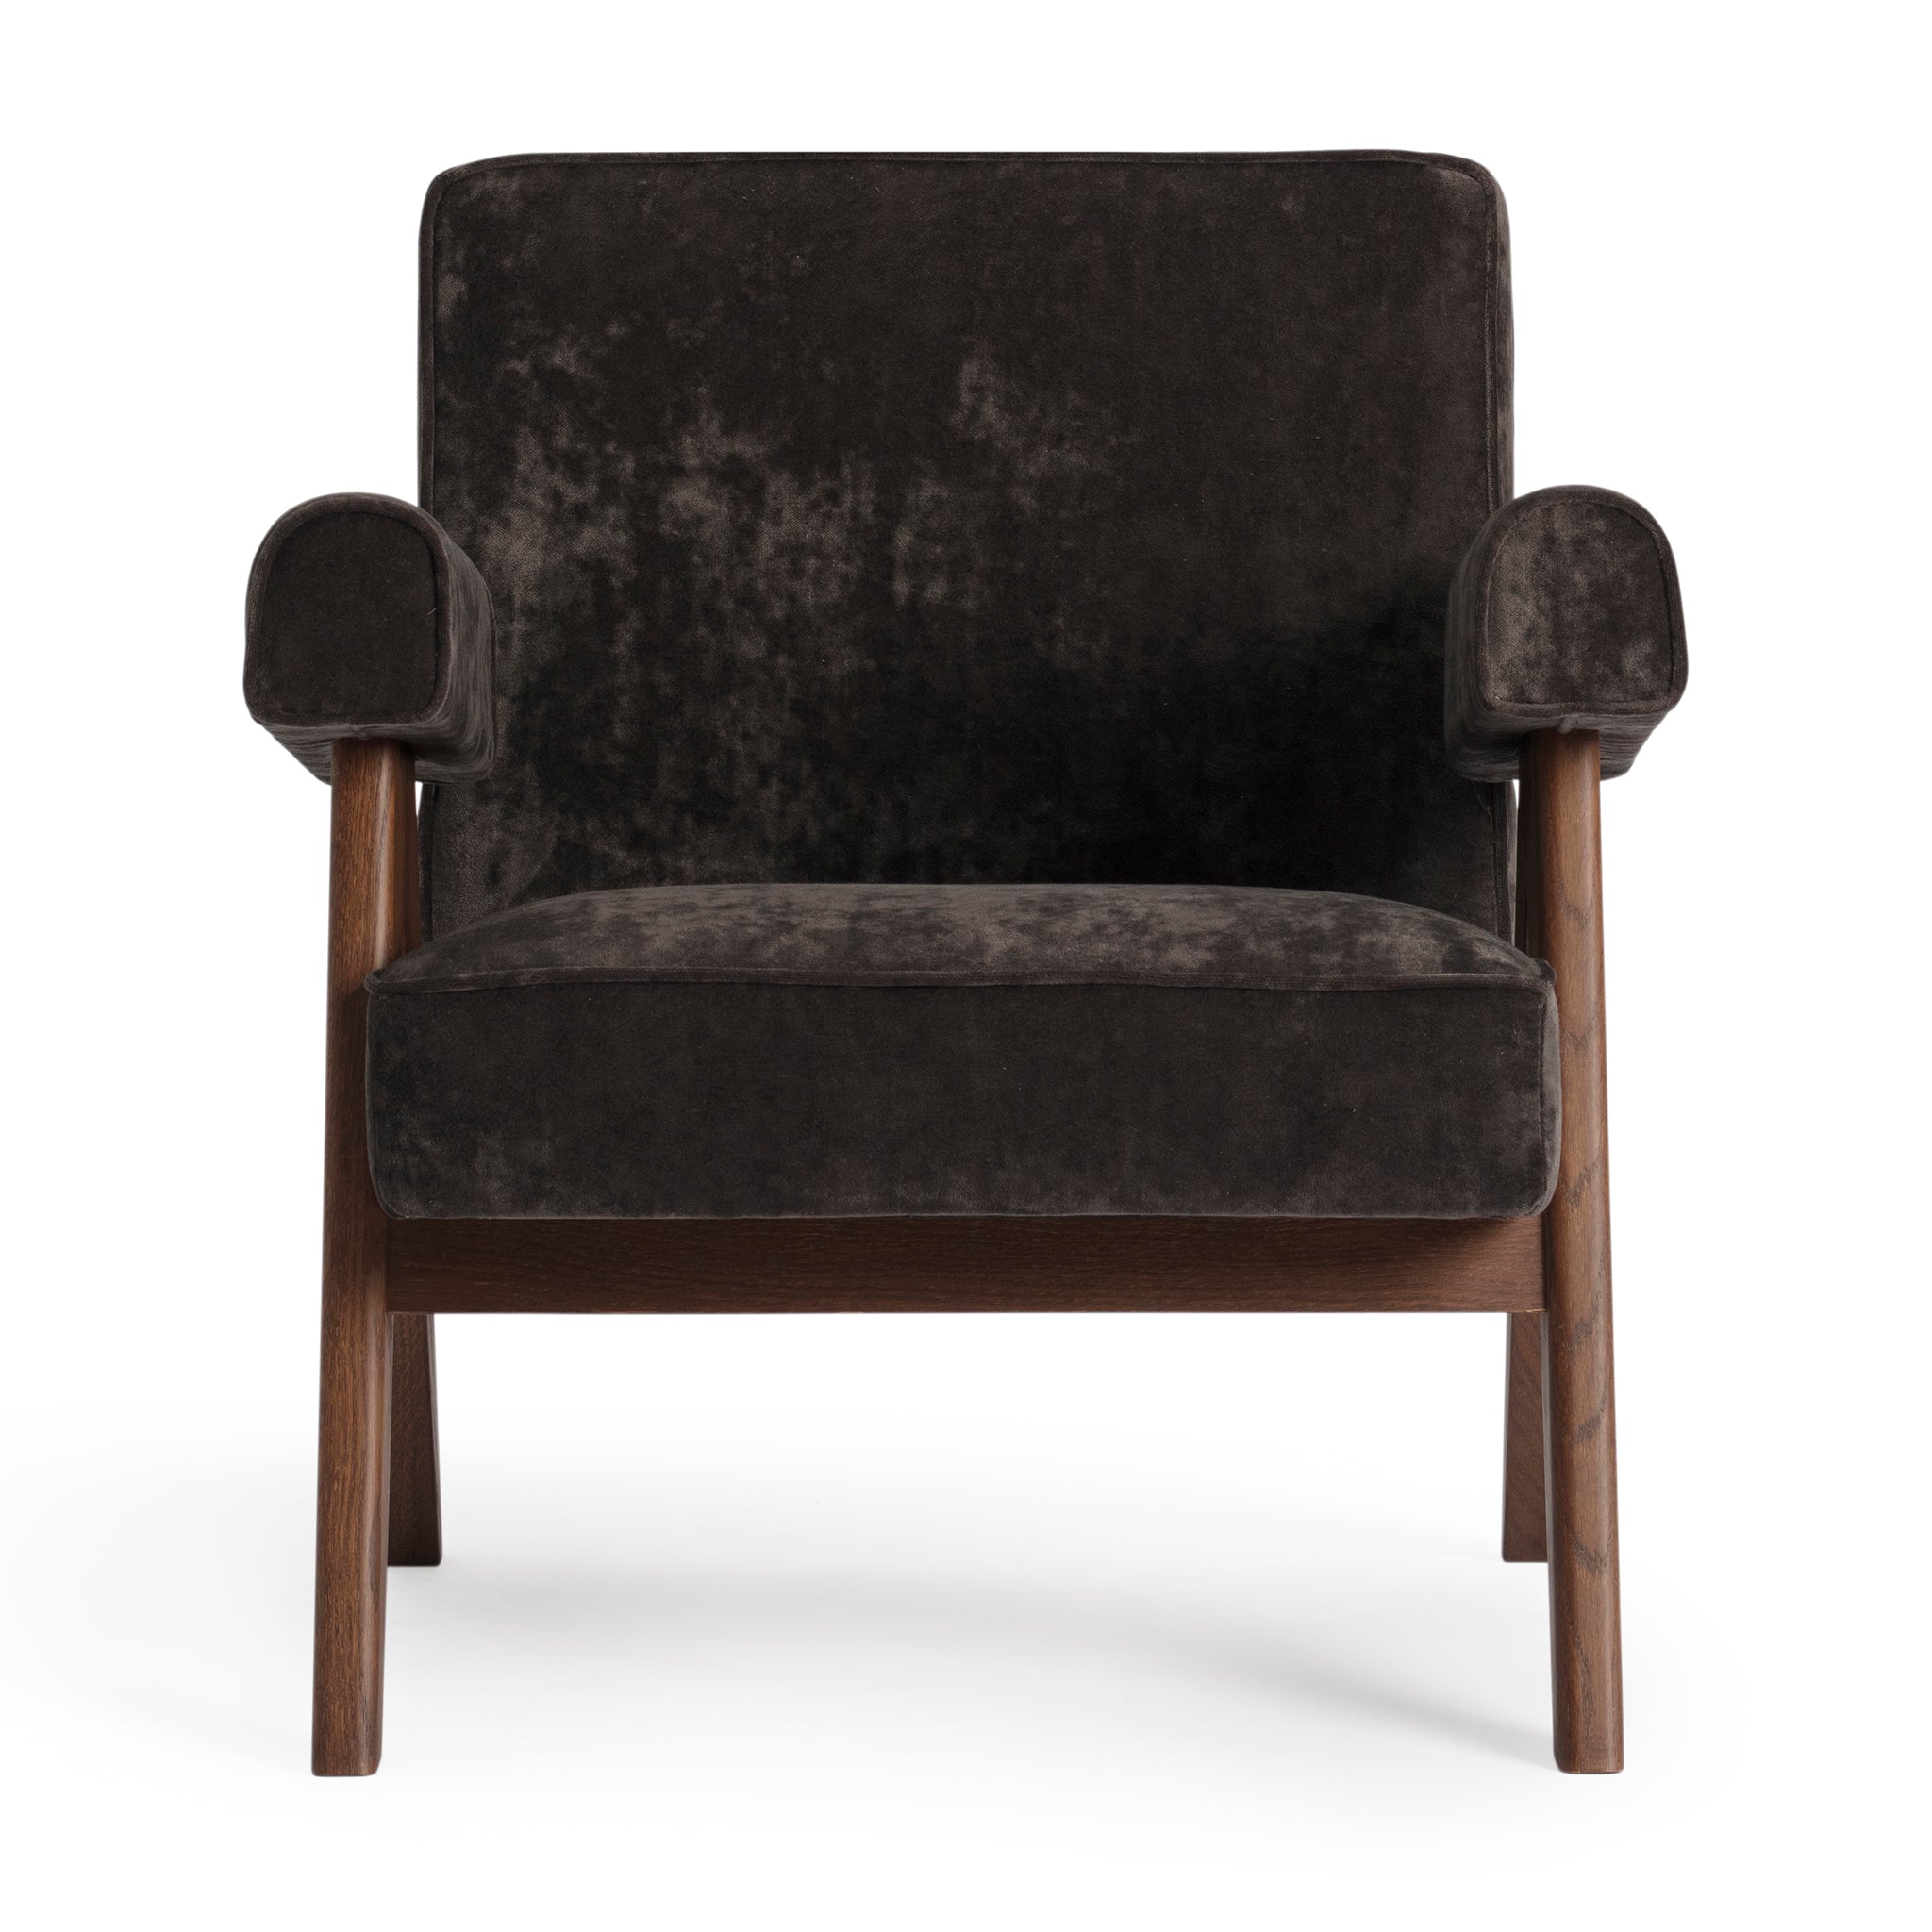 Front view of an authentic chandigarh lounge chair, pierre jeanneret era, walnut oak frame, chocolate brown mohair upholstery, by Klarel #K35-15